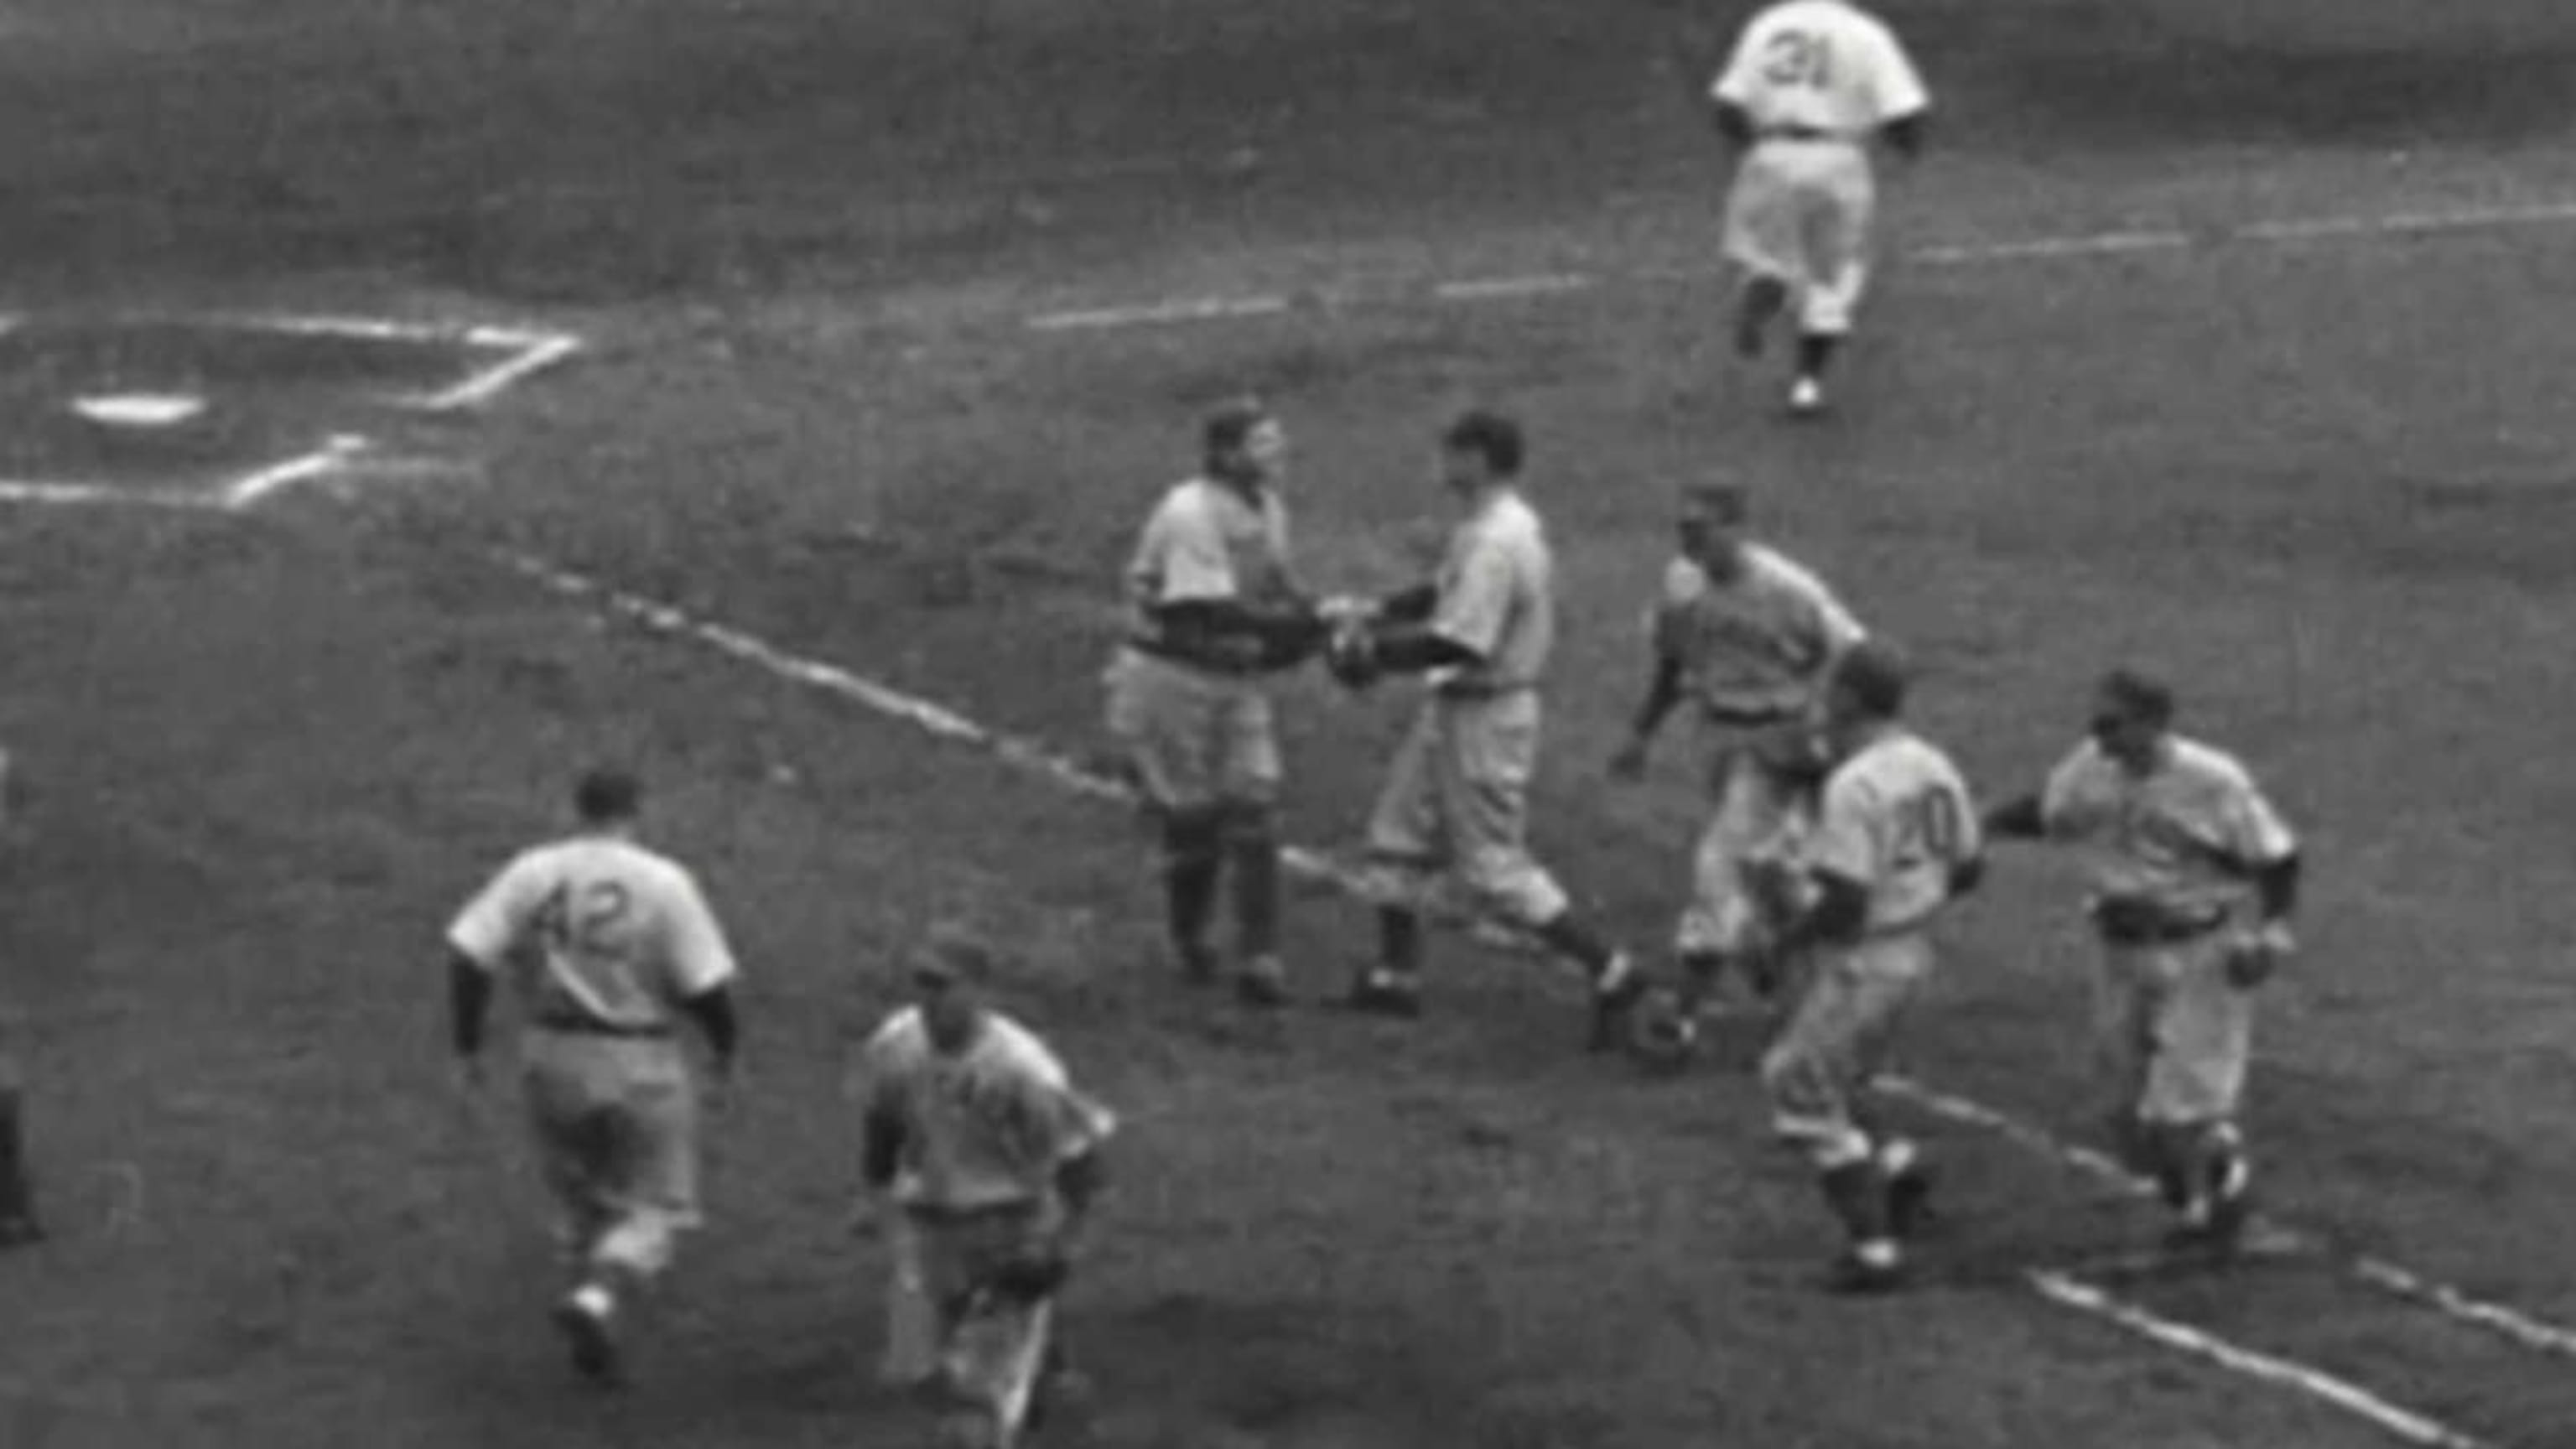 Last of the 1945 Tigers remembers World Series win